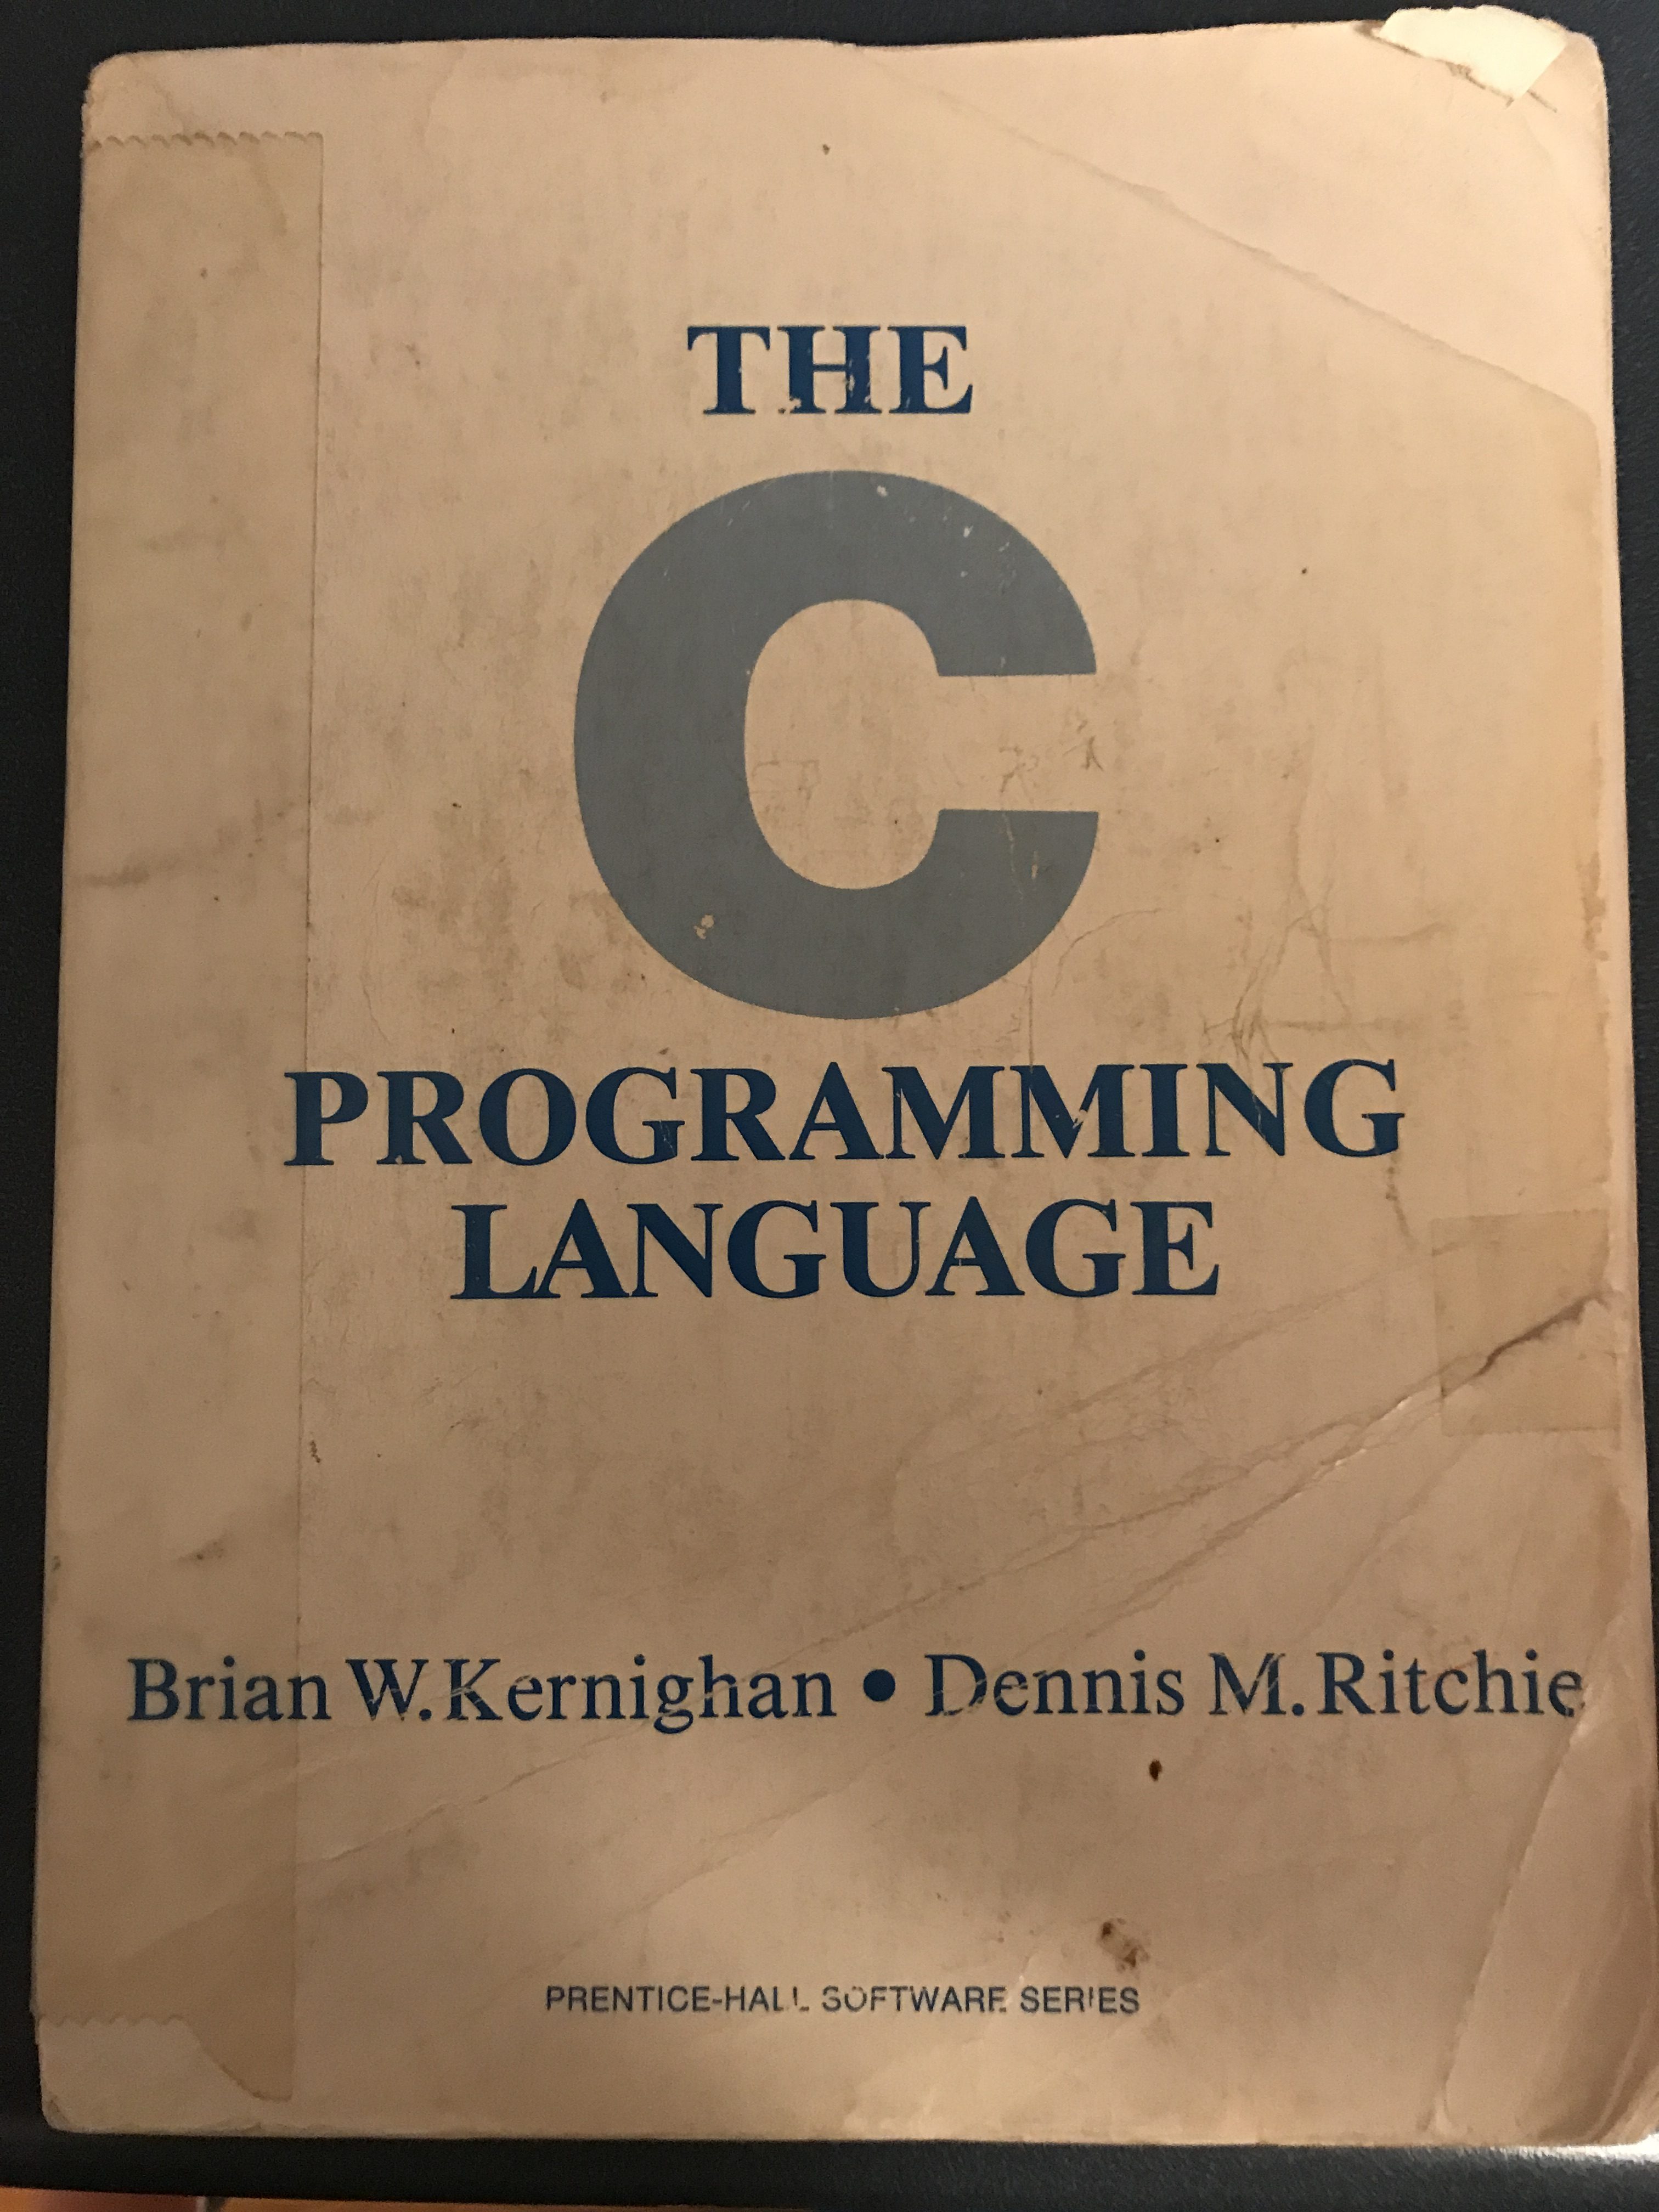 kernighan and ritchie